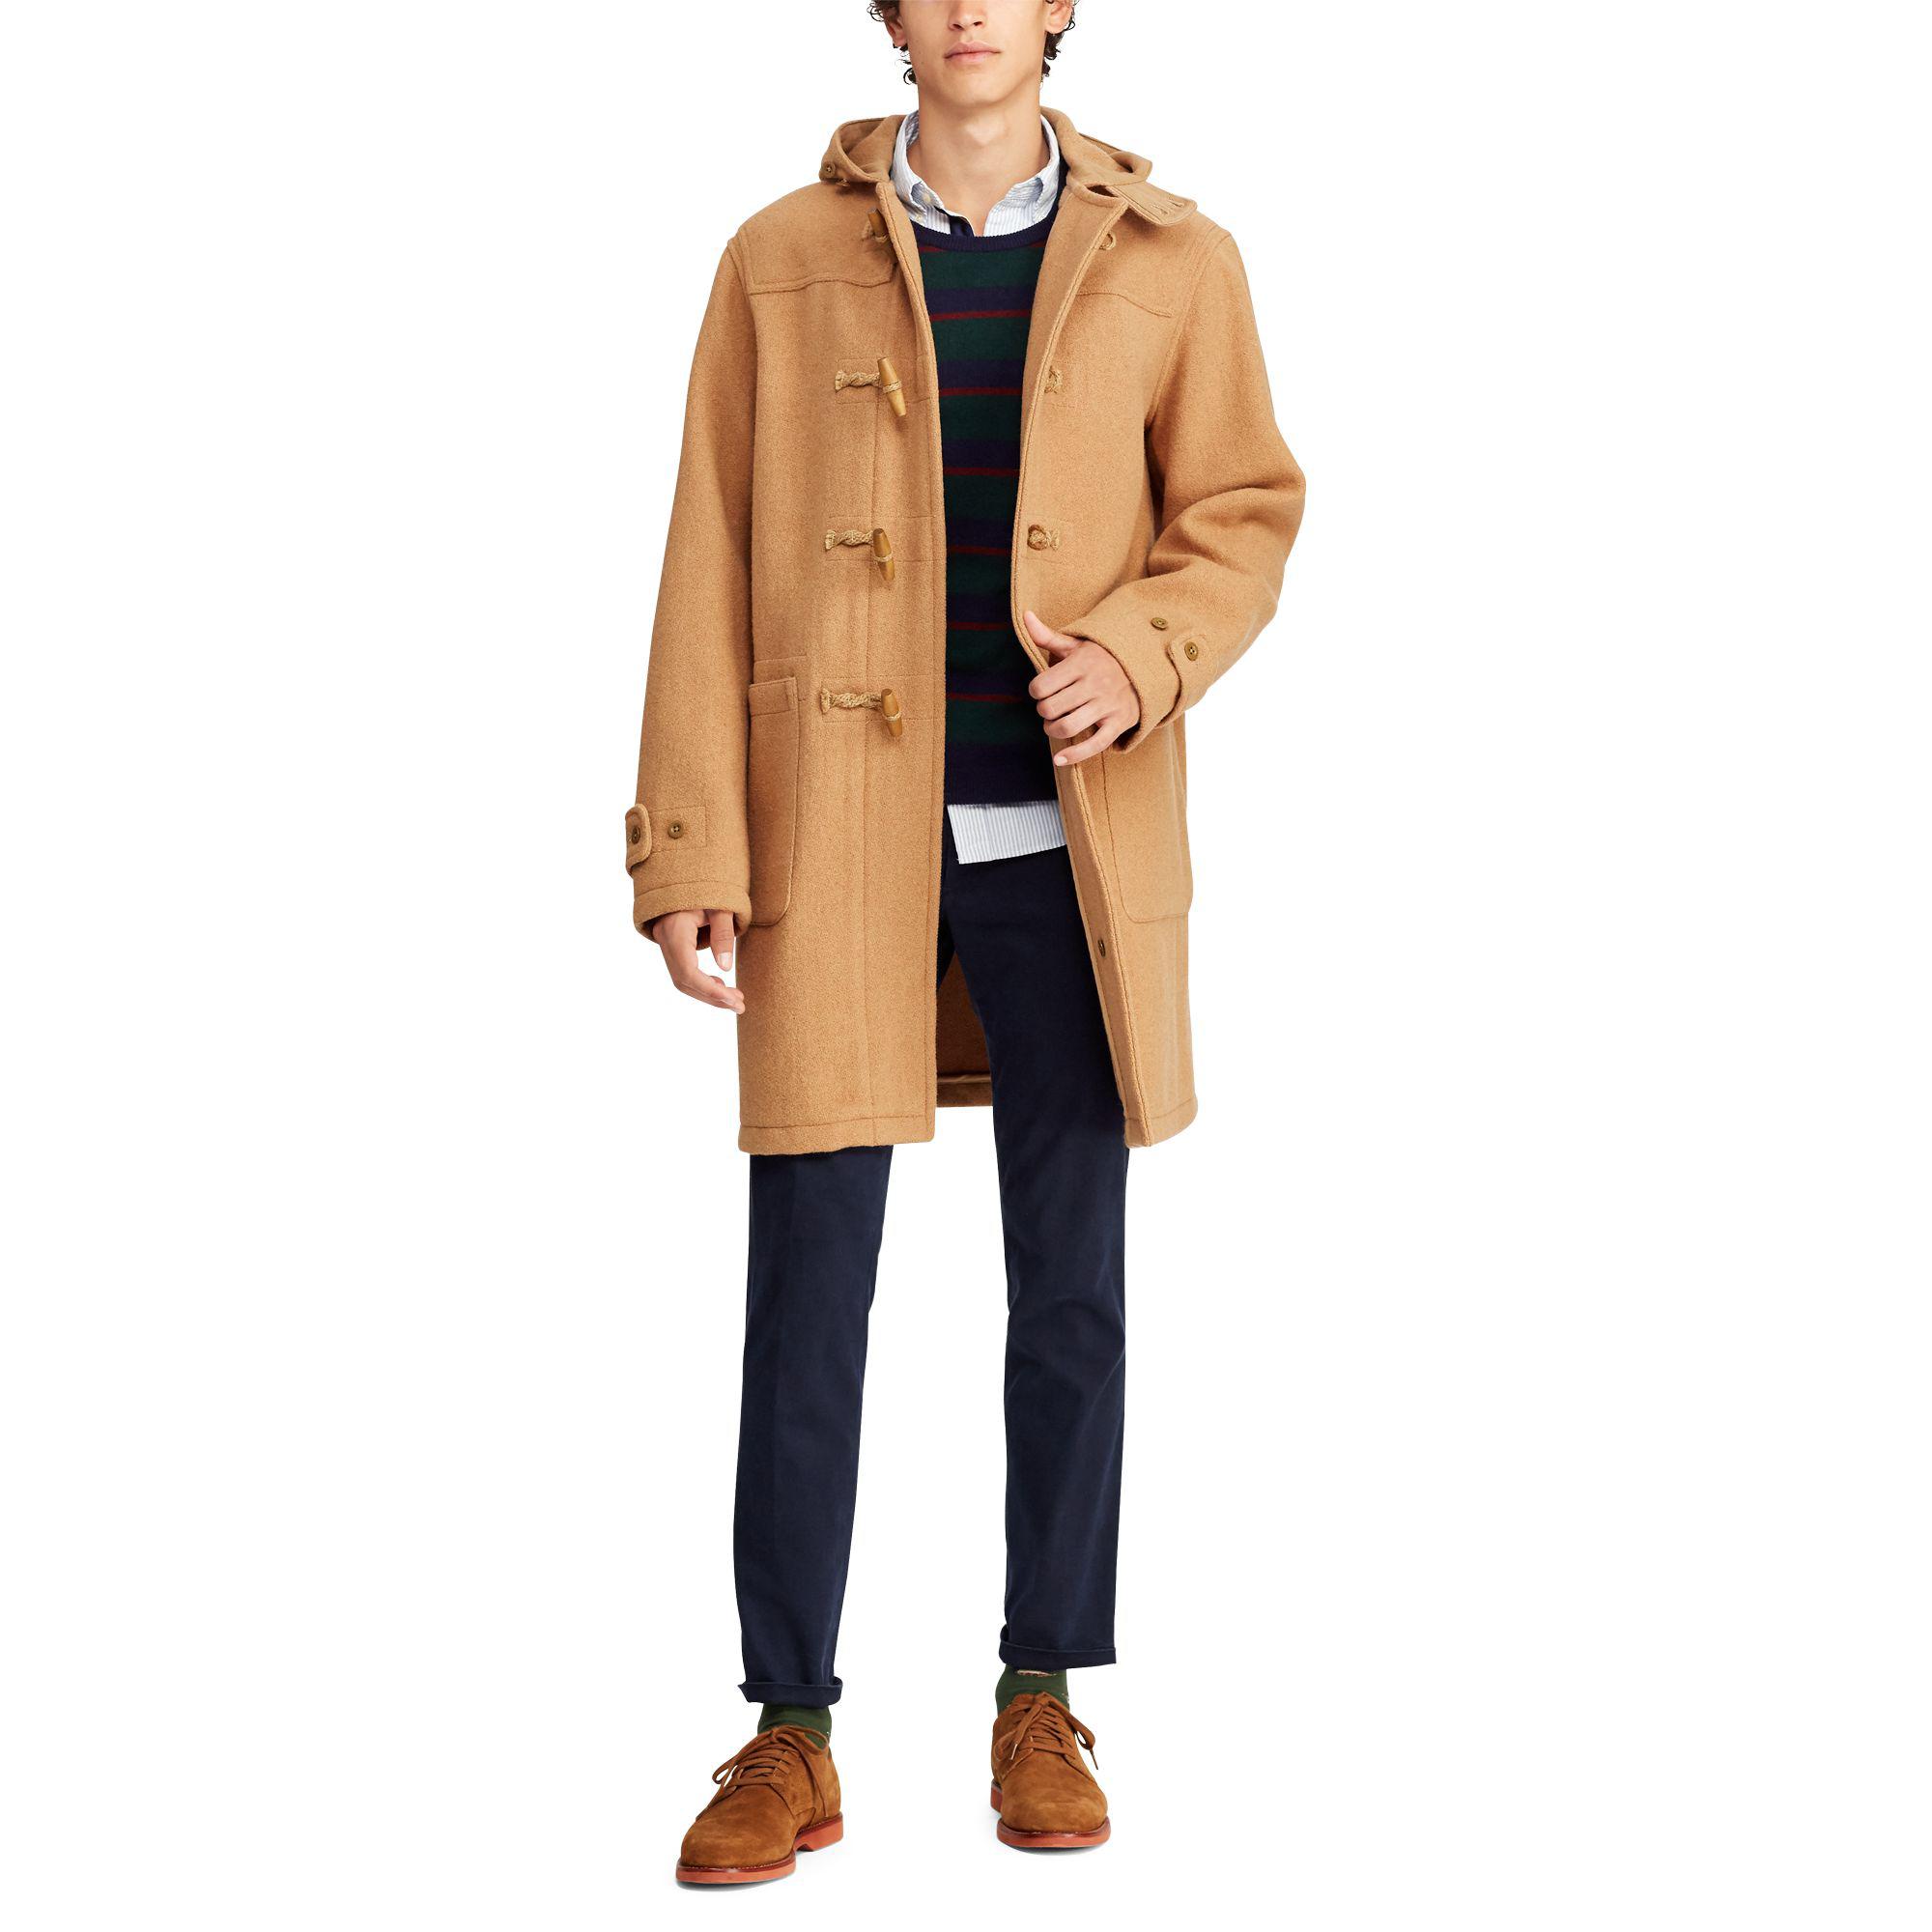 Polo Ralph Lauren Wool Twill Hooded Duffle Coat in Natural for Men | Lyst